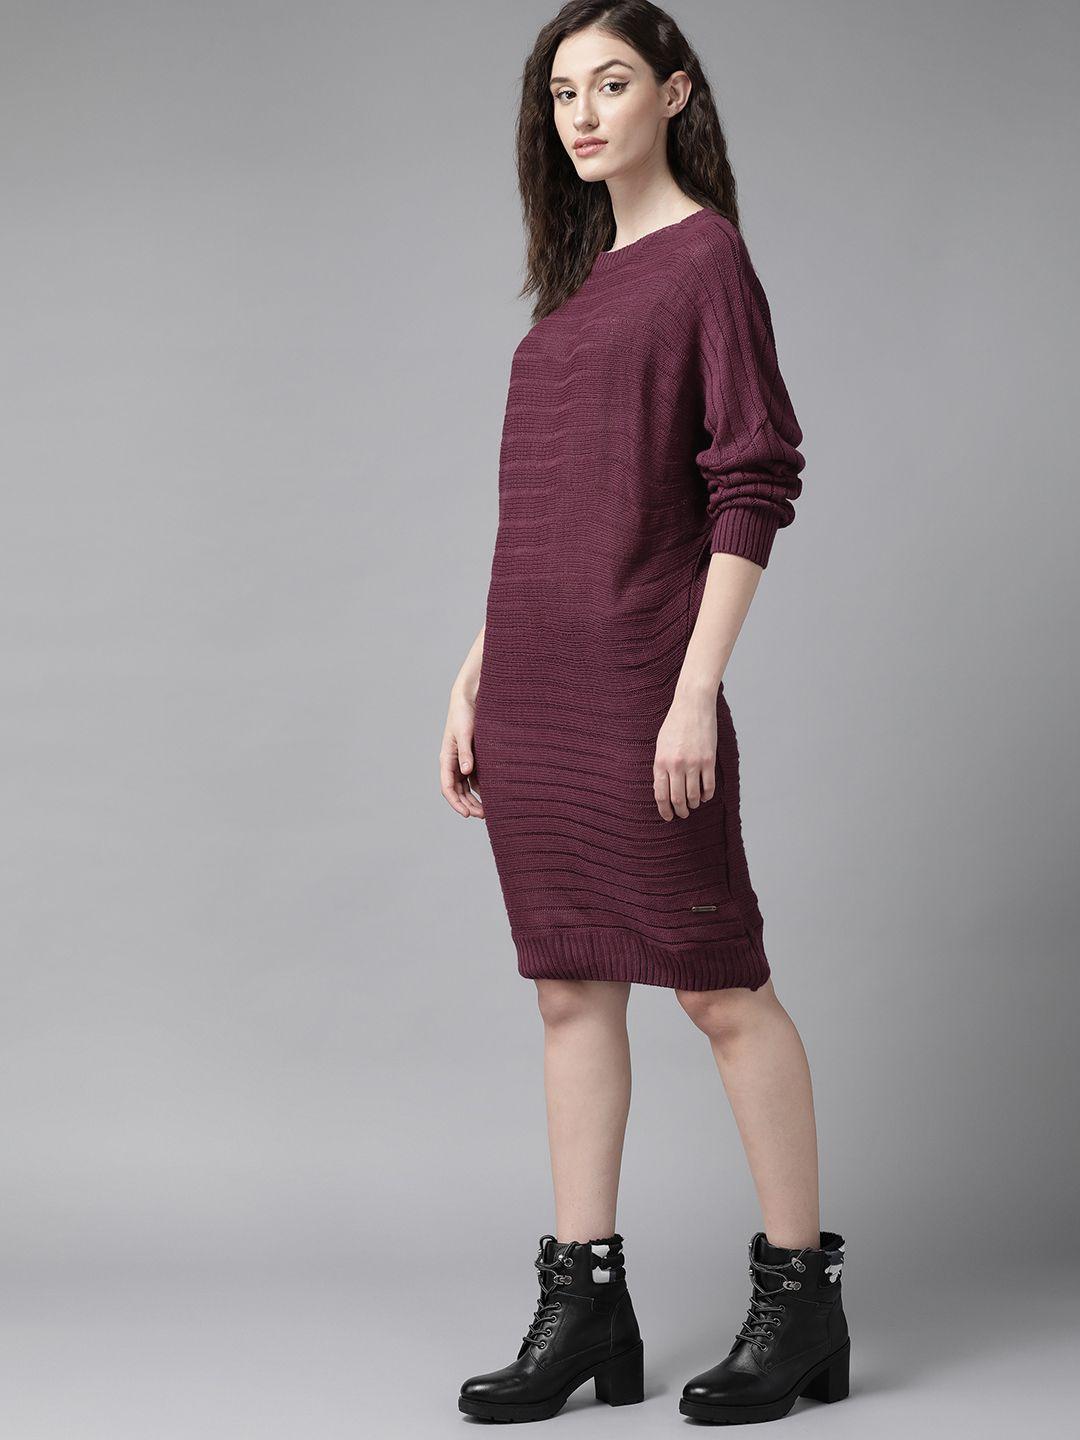 the roadster lifestyle co. maroon acrylic knitted jumper dress